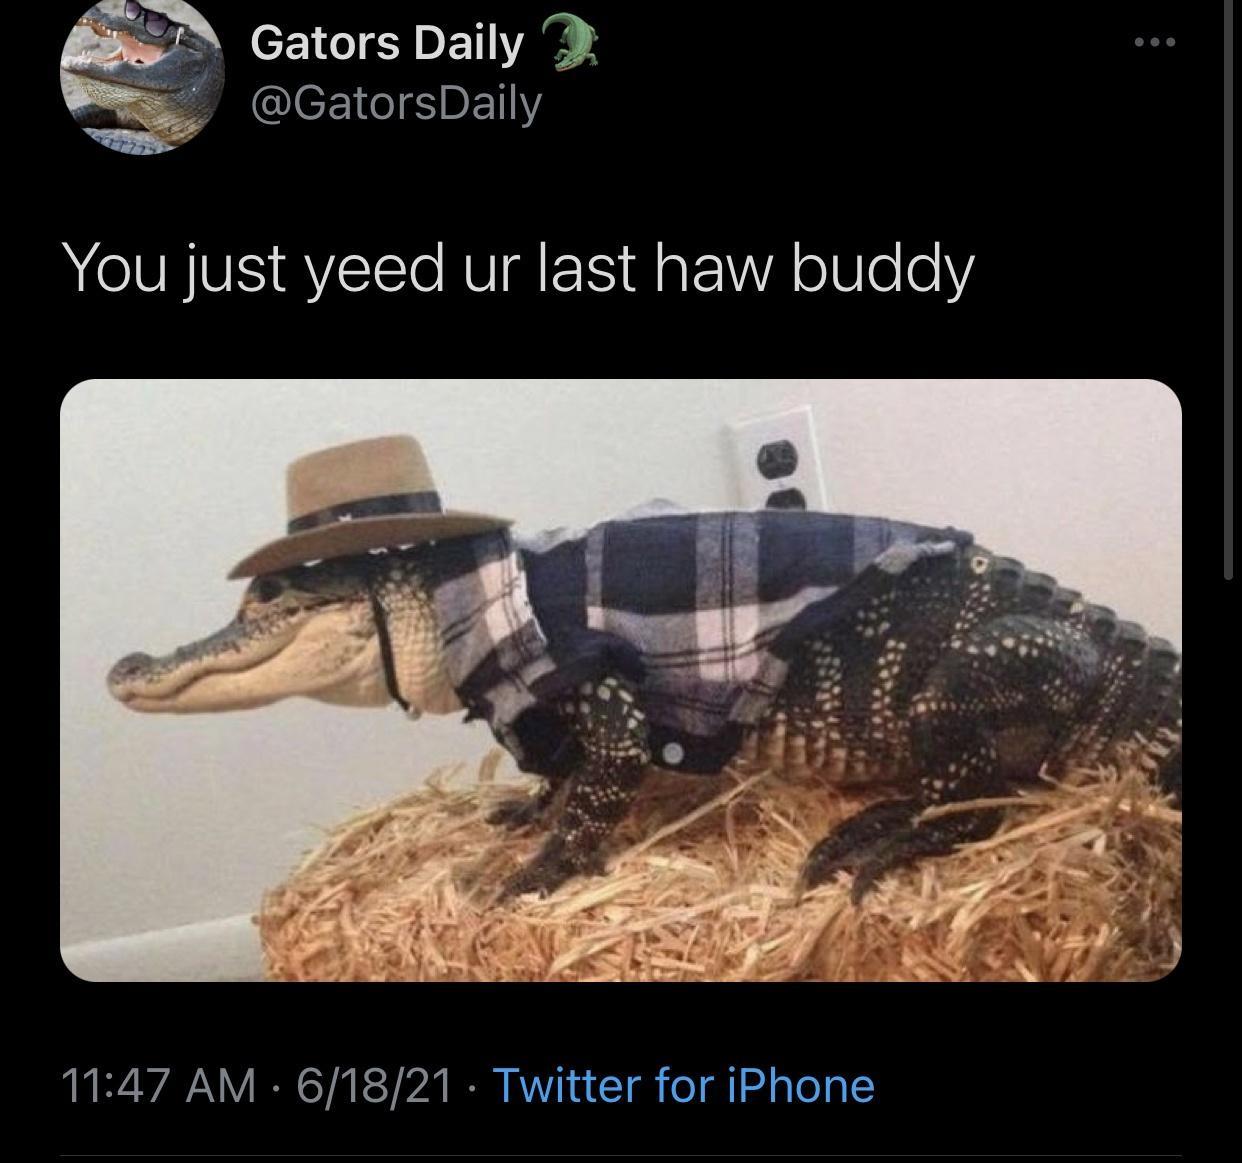 fauna - @ @ @ Gators Daily Daily You just yeed ur last haw buddy 61821 Twitter for iPhone